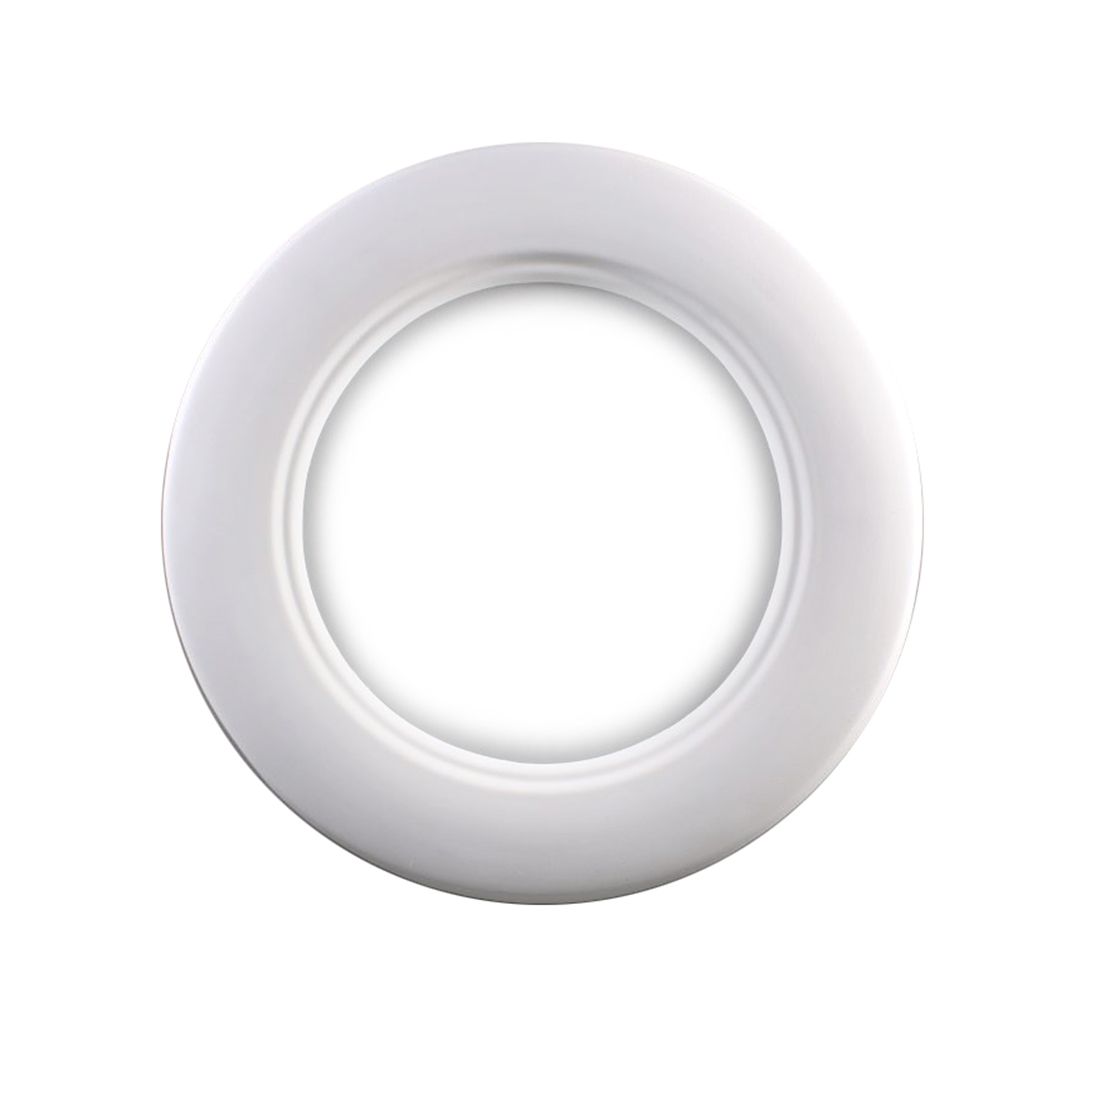 PLATE RING MOLD - 6" by CPI